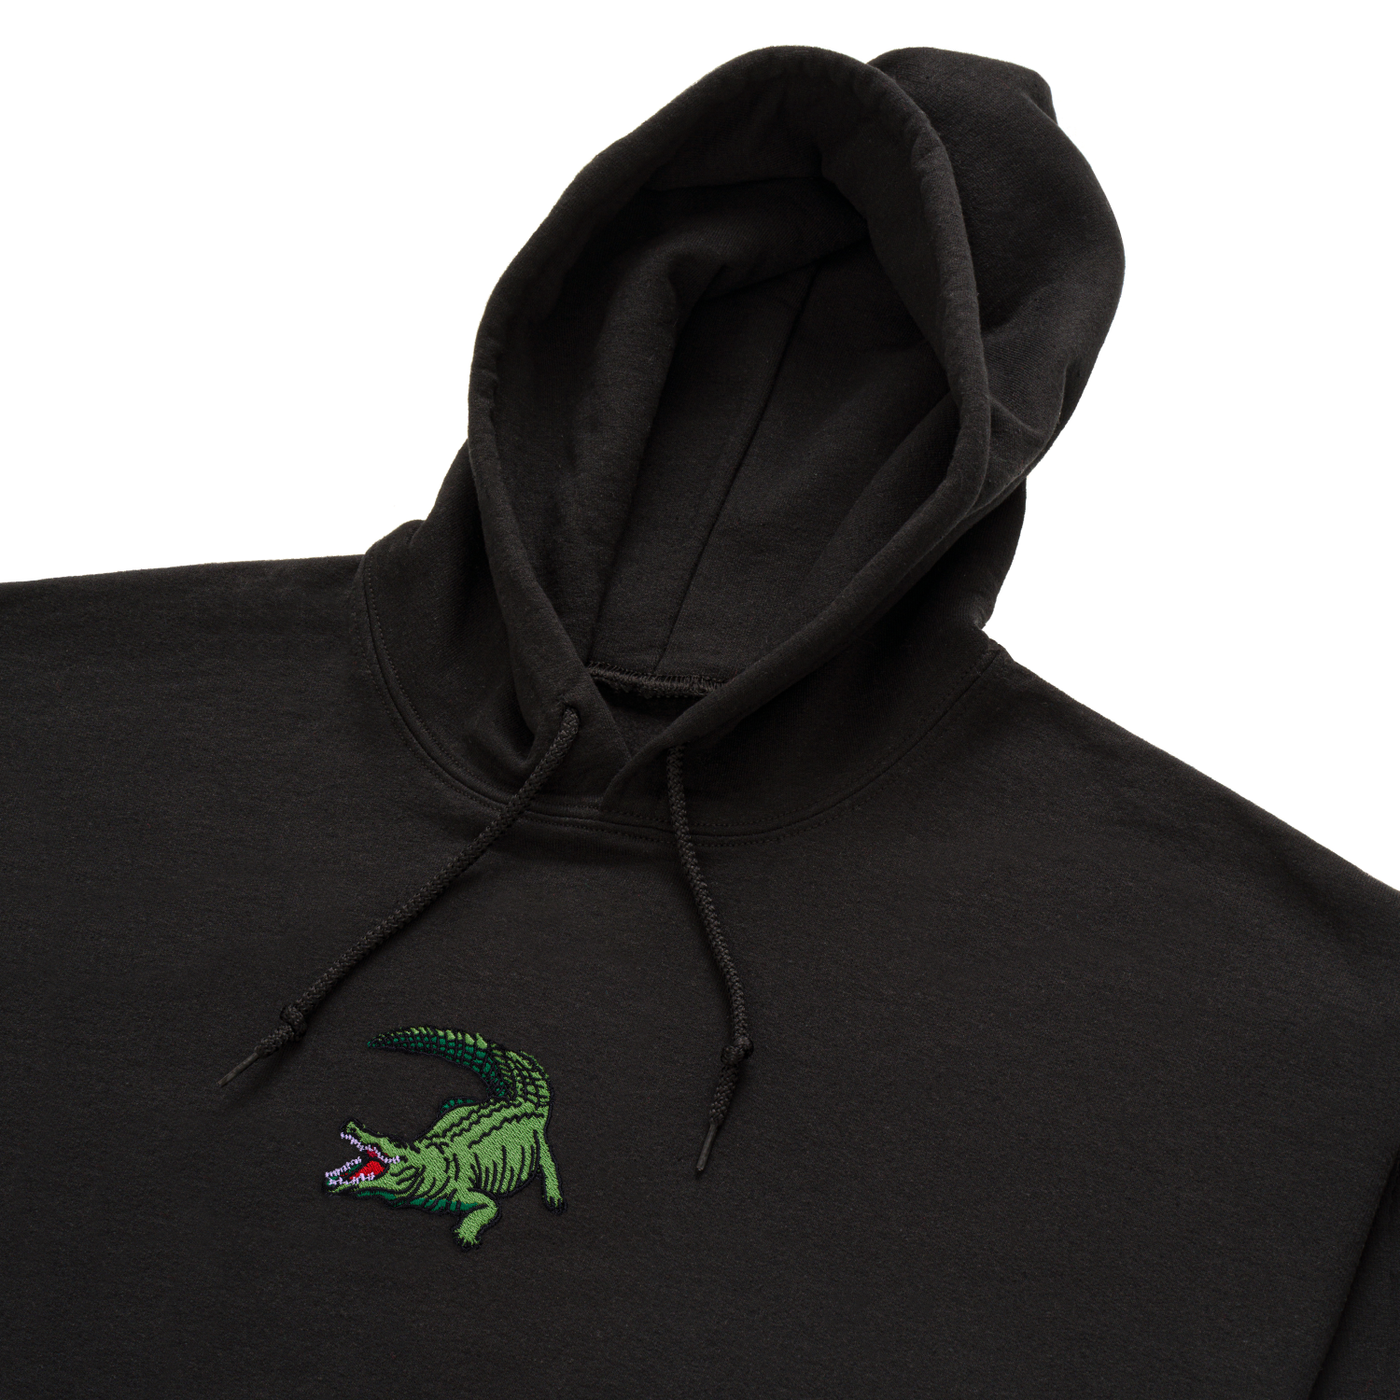 Bobby's Planet Men's Embroidered Saltwater Crocodile Hoodie from Australia Down Under Animals Collection in Black Color#color_black